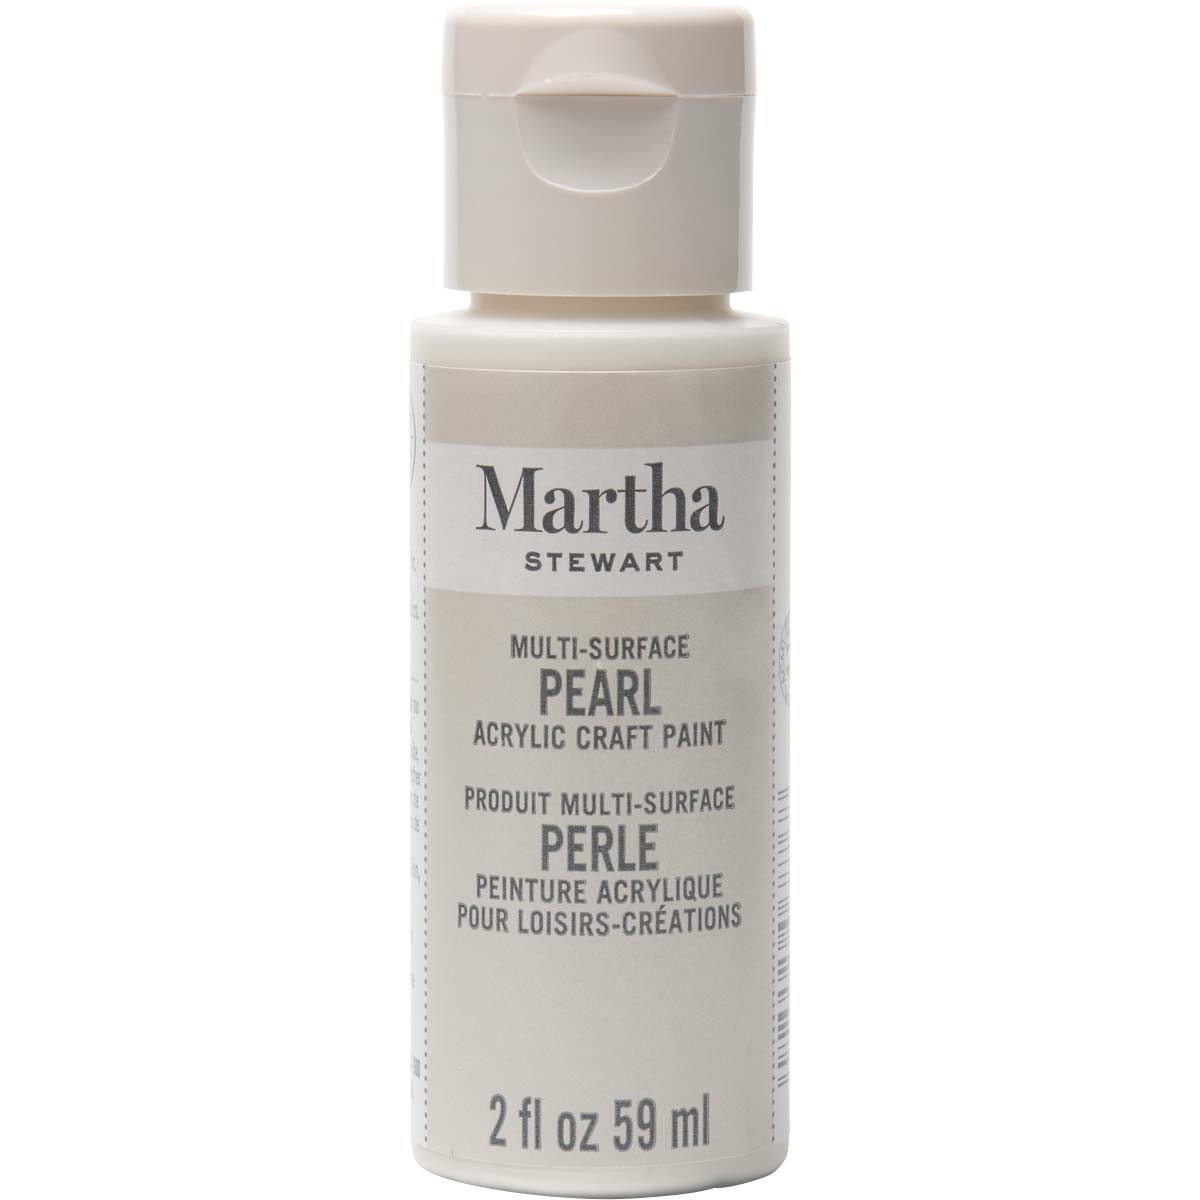 Martha Stewart ® Multi-Surface Pearl Acrylic Craft Paint - Mother of Pearl, 2 oz. - 32127CA